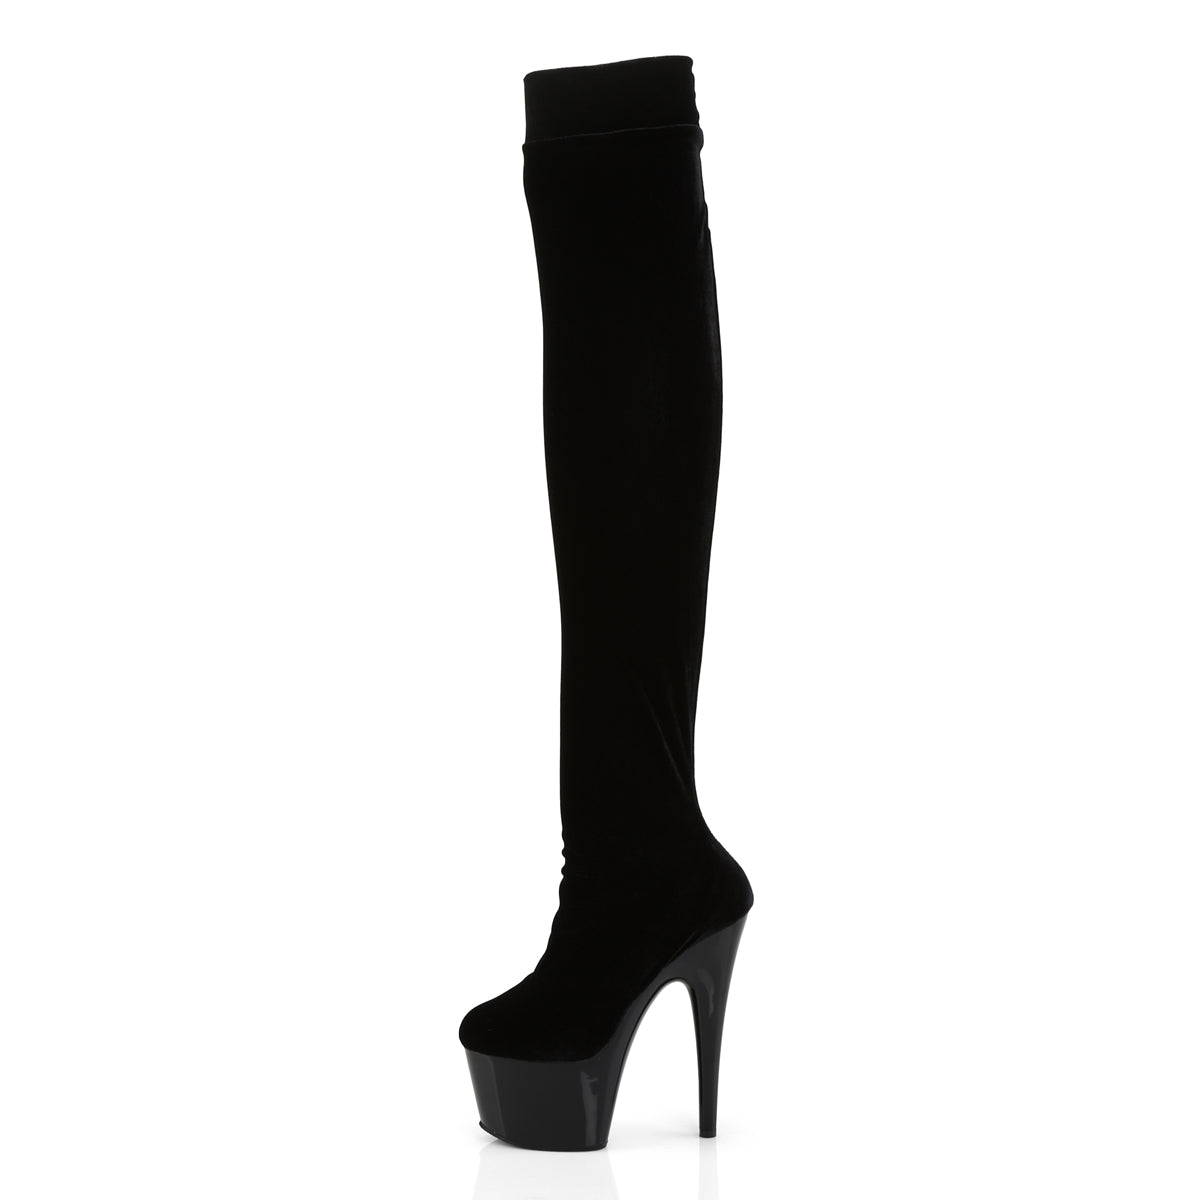 ADORE-3002 / B / VEL 7 "PLEASER FAST DELIVERY 24-48h 